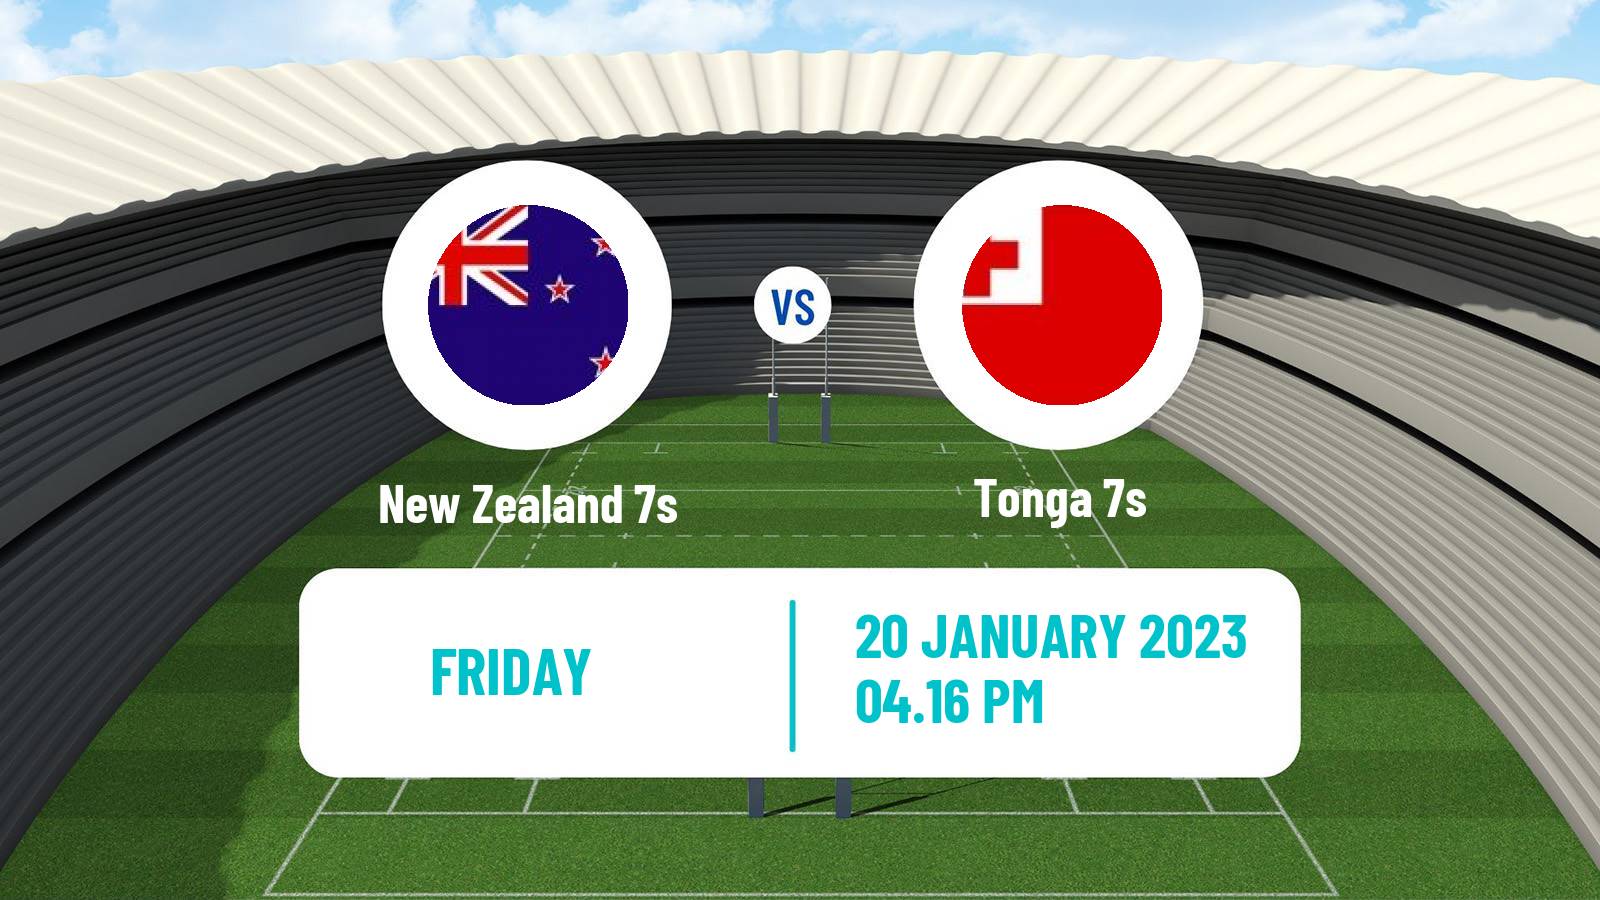 Rugby union Sevens World Series - New Zealand New Zealand 7s - Tonga 7s